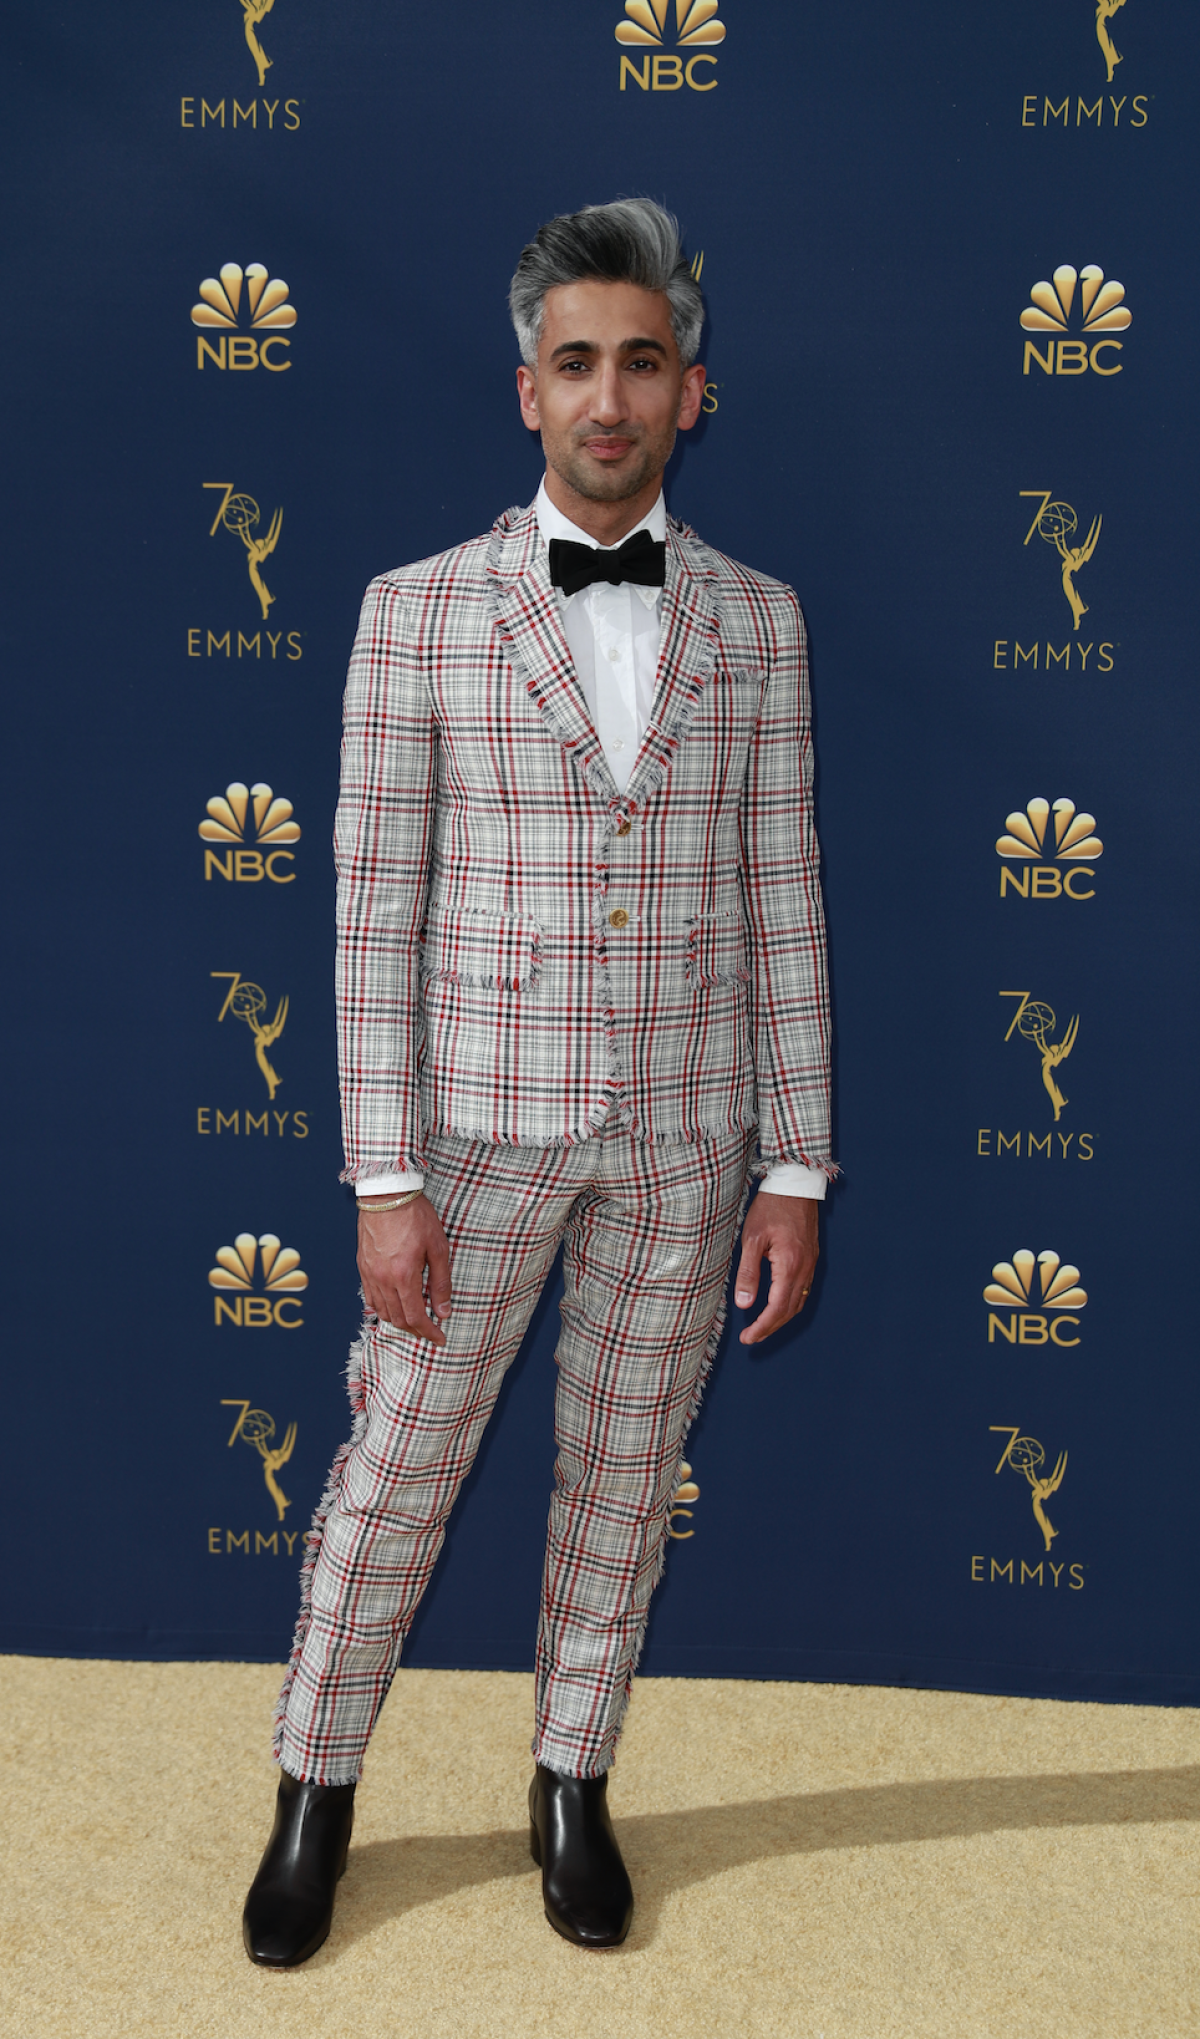 Tan France at the 2018 Emmy Awards.